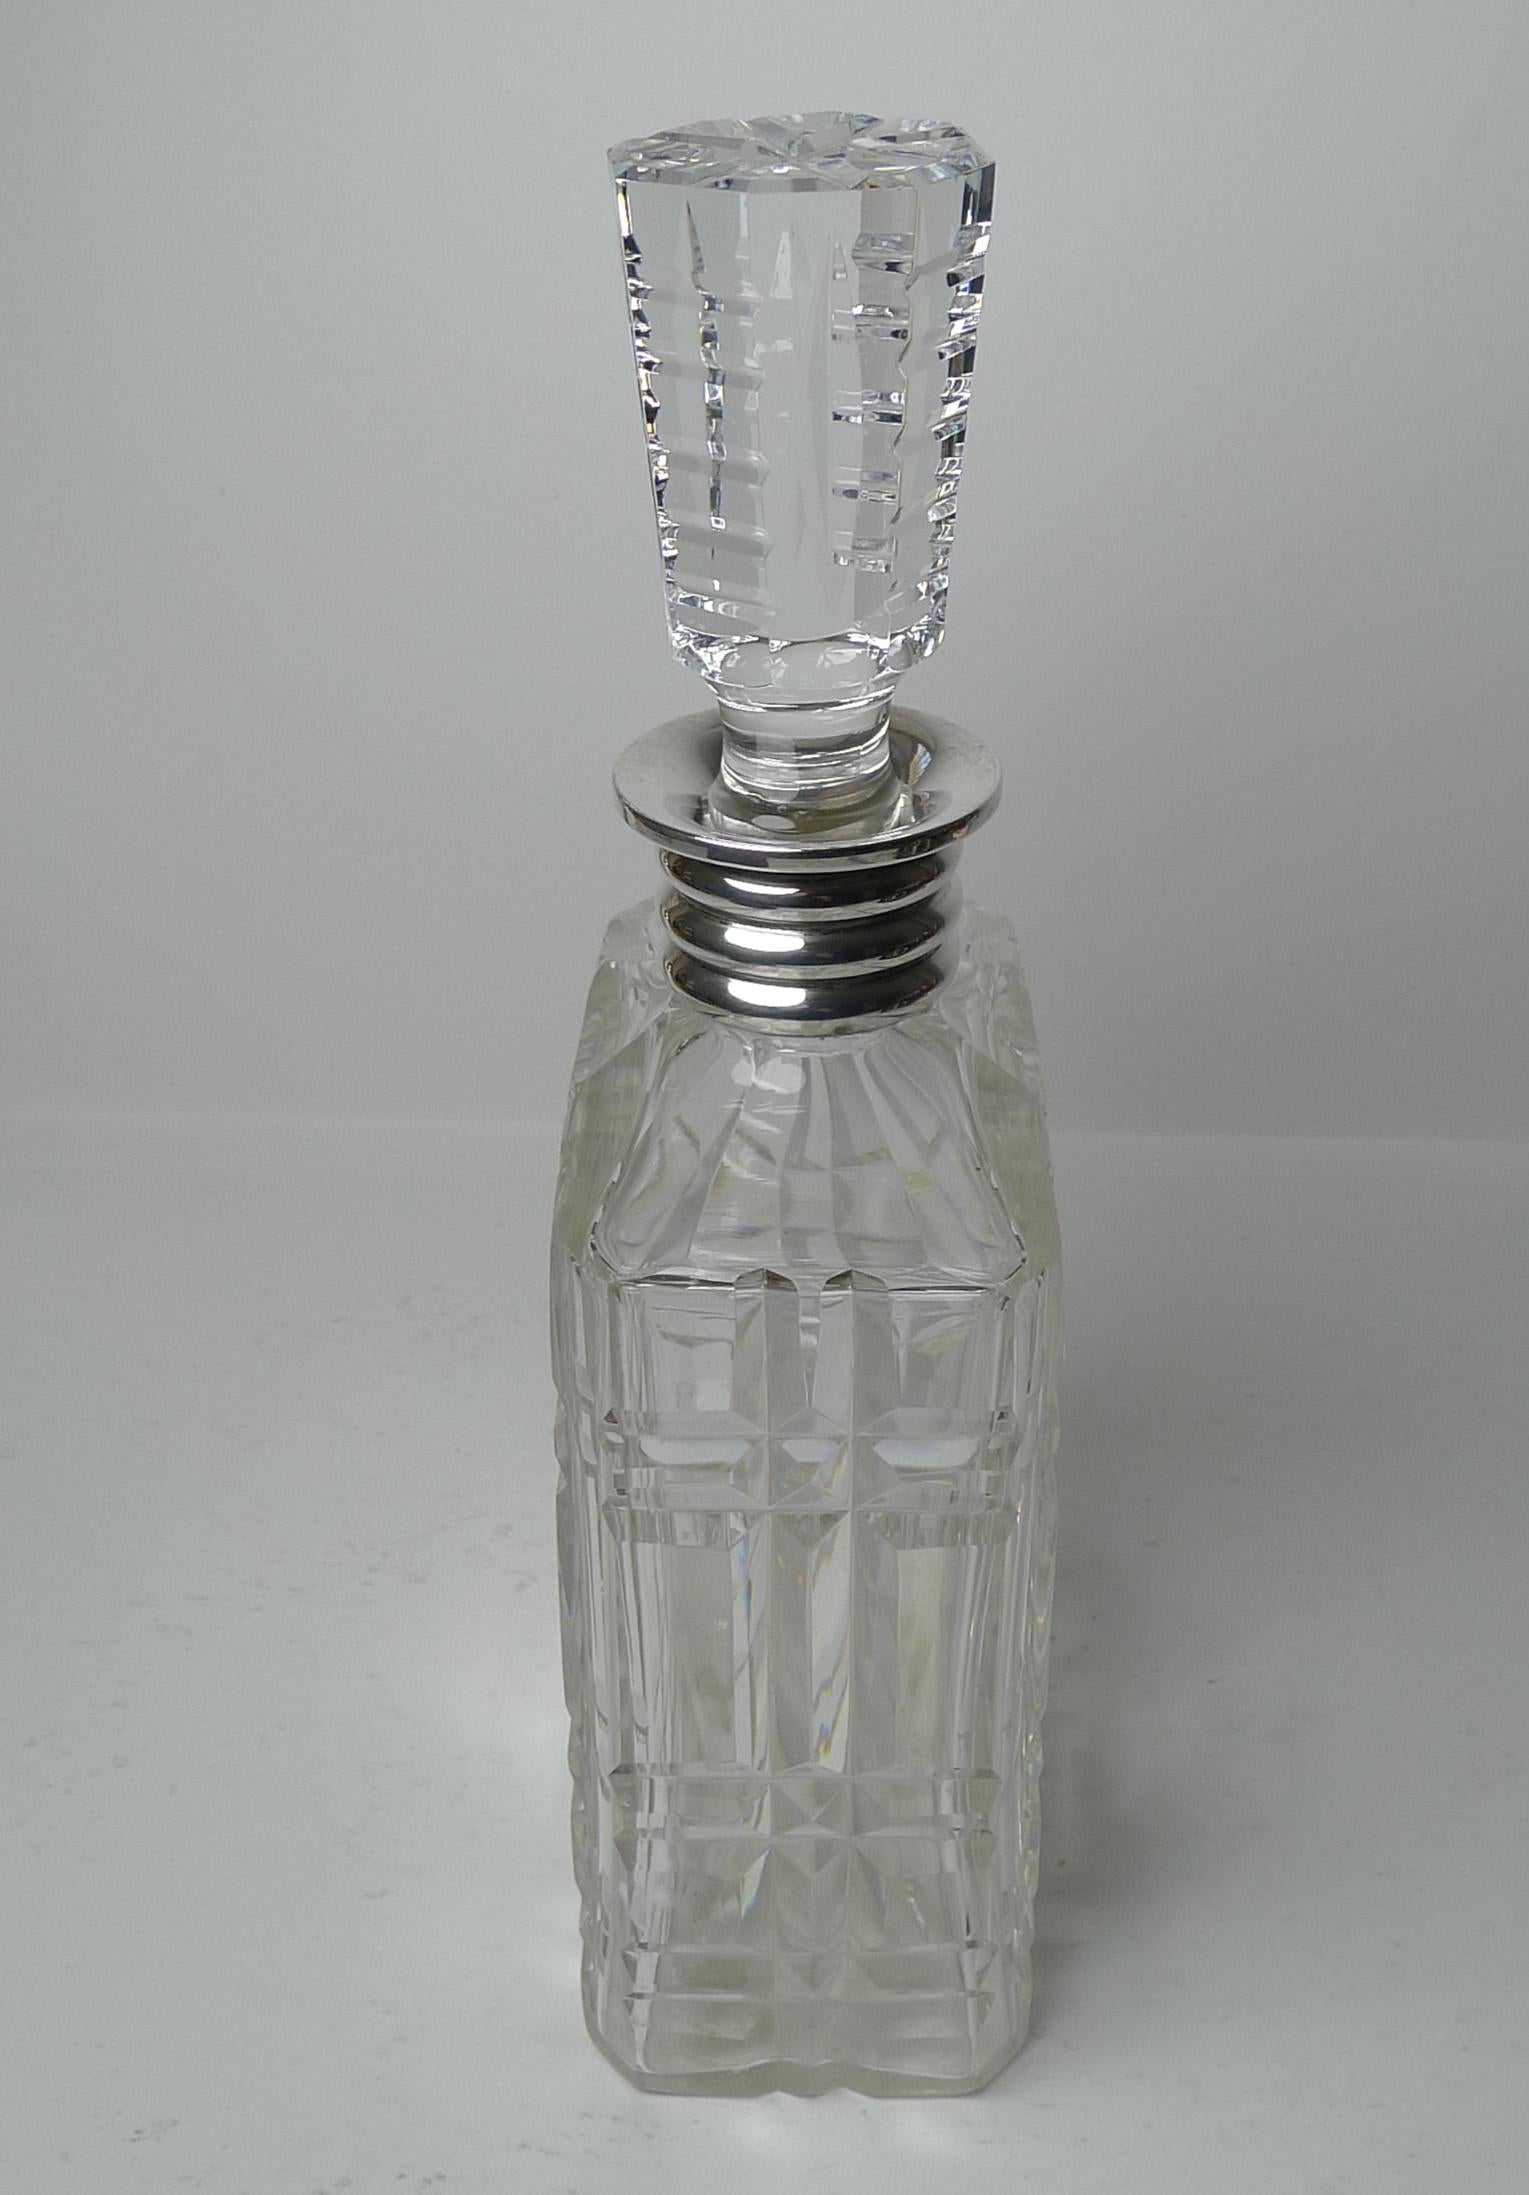 Striking English Cut Crystal and Sterling Silver Art Deco Decanter, 1935 For Sale 5